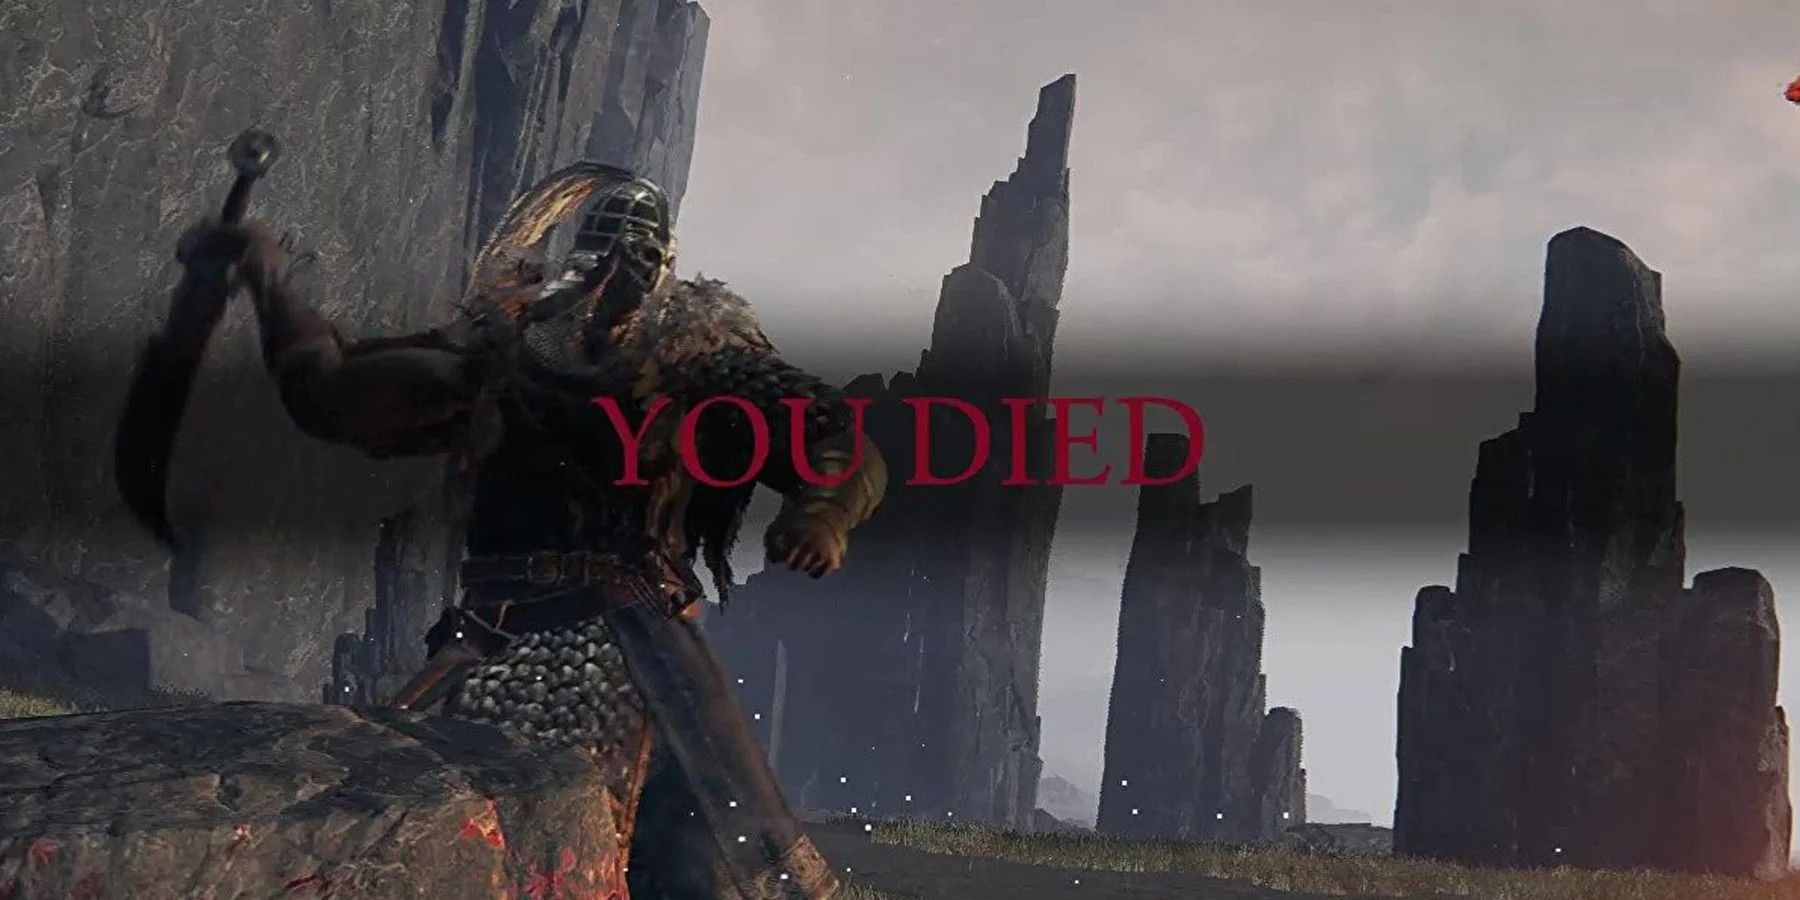 An armored Elden Ring character swinging a sword, with the Dark Souls "You Died" text overlaid.